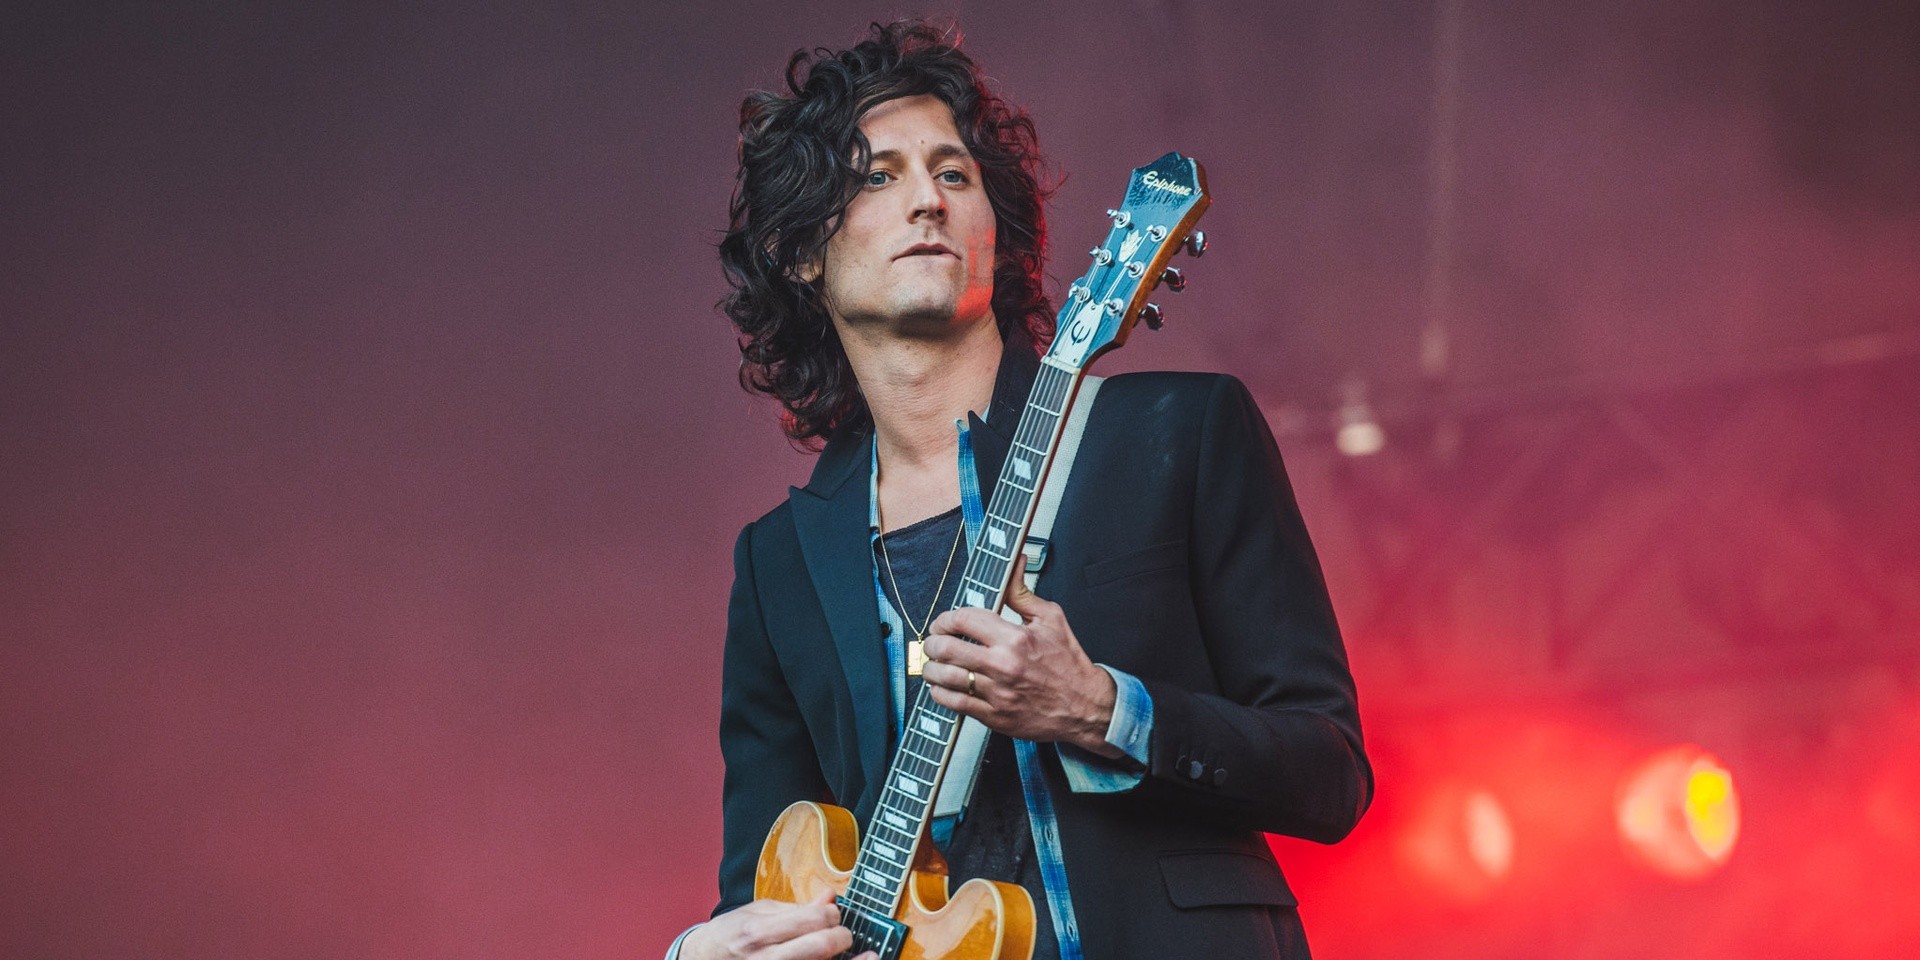 Nick Valensi hints that The Strokes' new album is finished